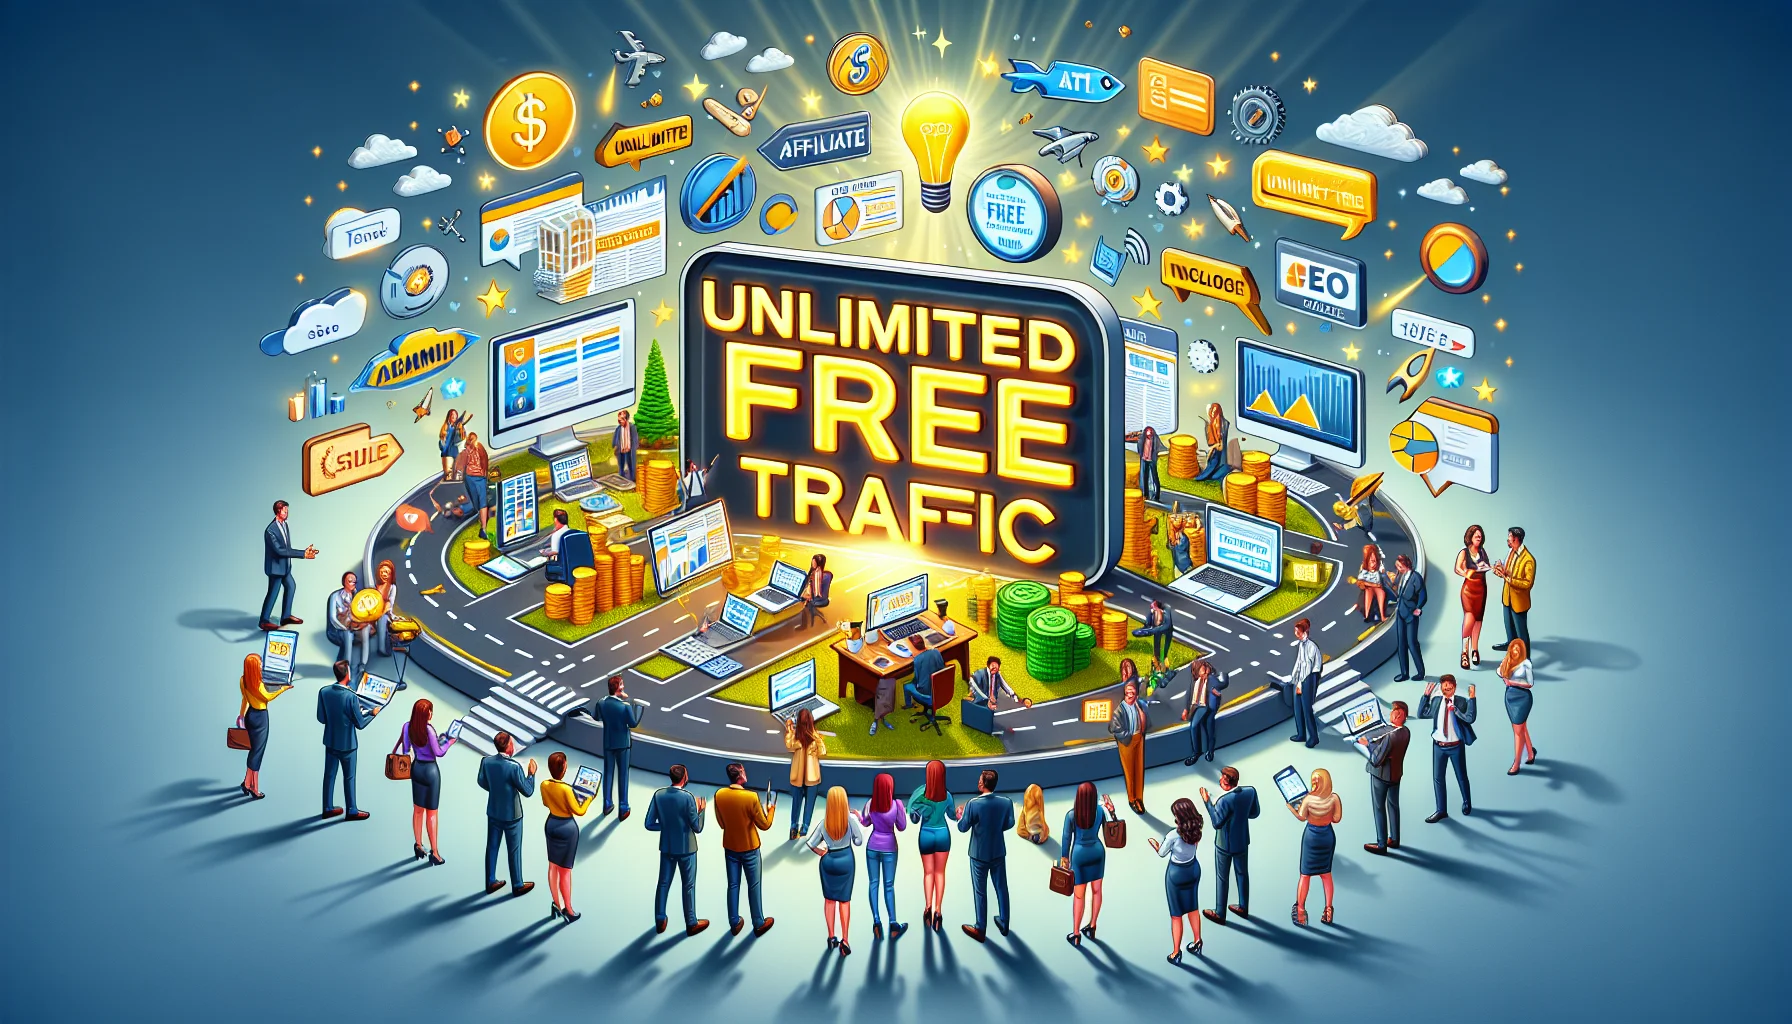 Create a humorous, real-world illustration of a hypothetical scenario relating to online income generation. The centerpiece of the image should be a large sign that reads 'Unlimited Free Traffic' and casts a bright, inviting glow. Surround it with visual symbols of digital marketing such as affiliate links, social media icons, an ecommerce store, and SEO tools. On one side, depict a diverse group of individuals animatedly discussing their strategies, sharing laptops and tablets to show charts and figures. The atmosphere should be akin to an active online market, with everyone hustling and bustling to turn their digital efforts into gold.